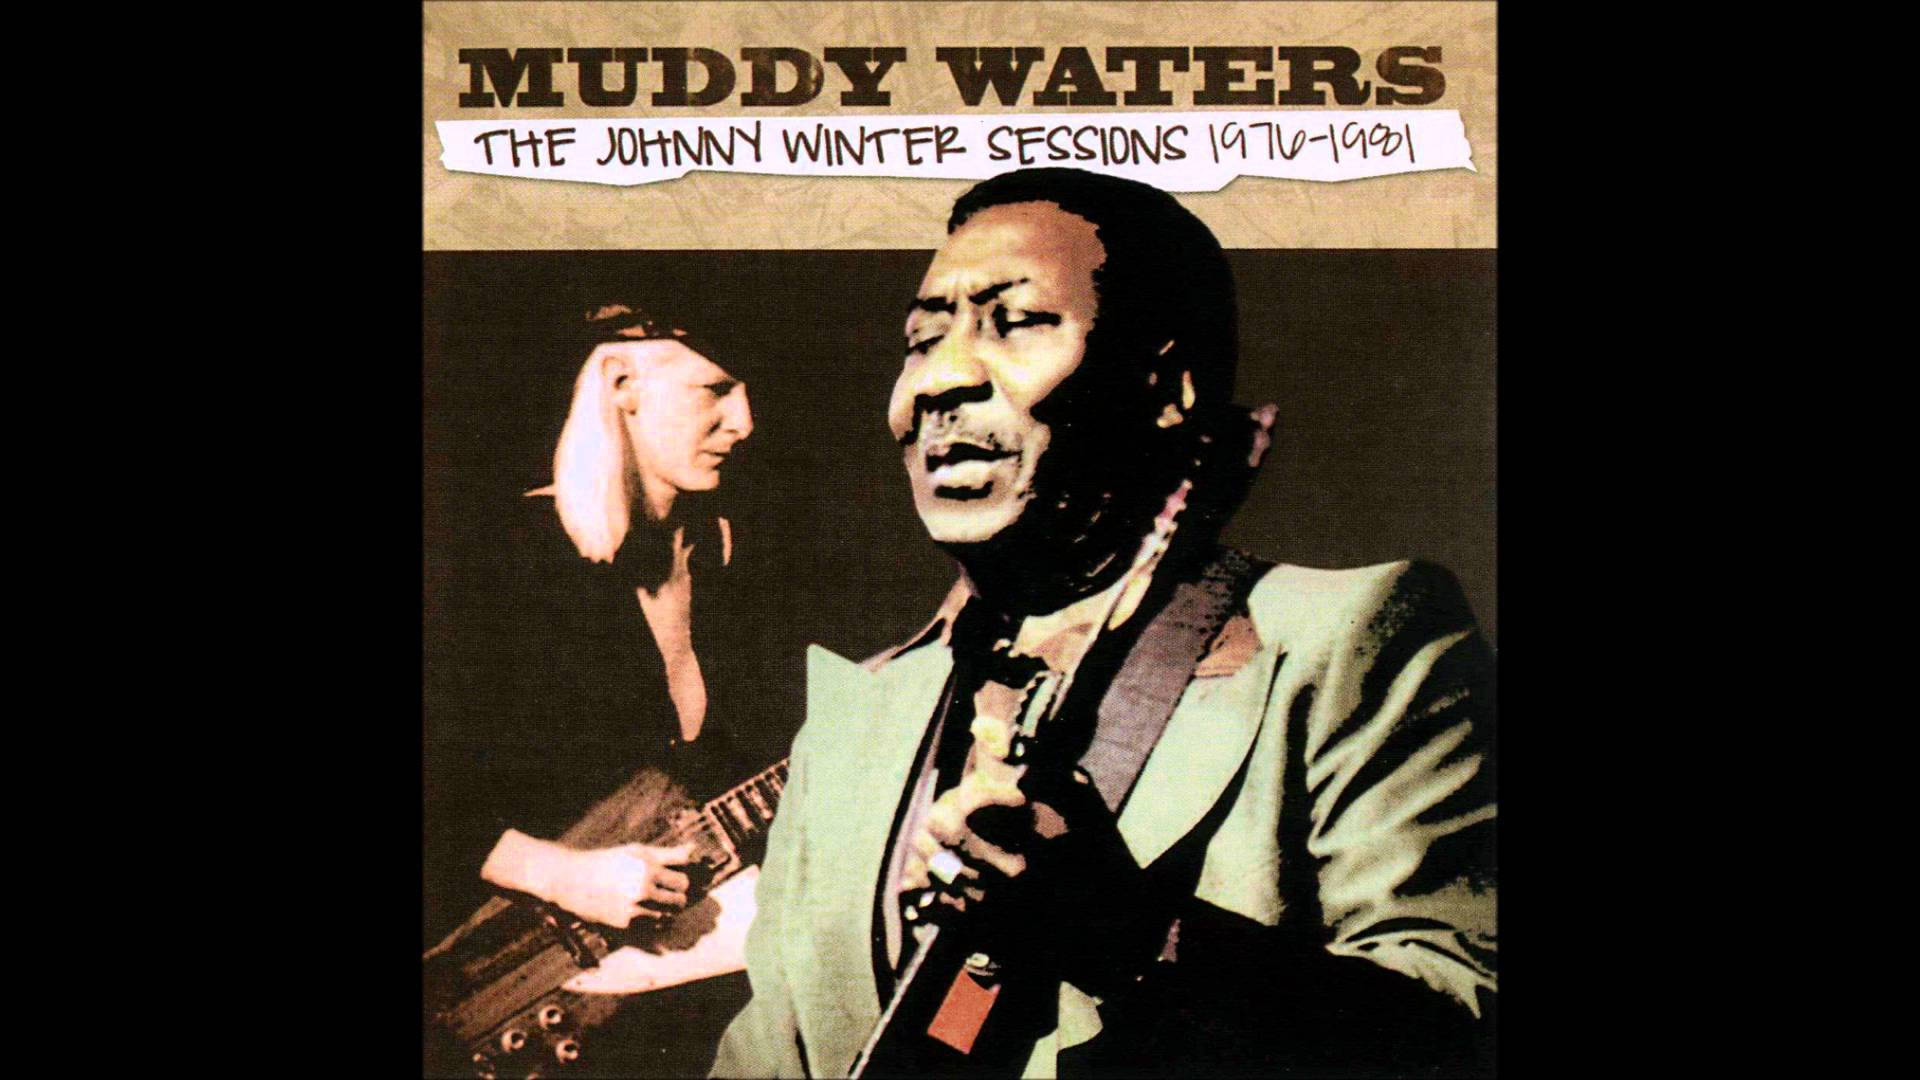 Muddy Waters The Johnny Winter Sessions 1981 Album Cover Væg Tapet Wallpaper